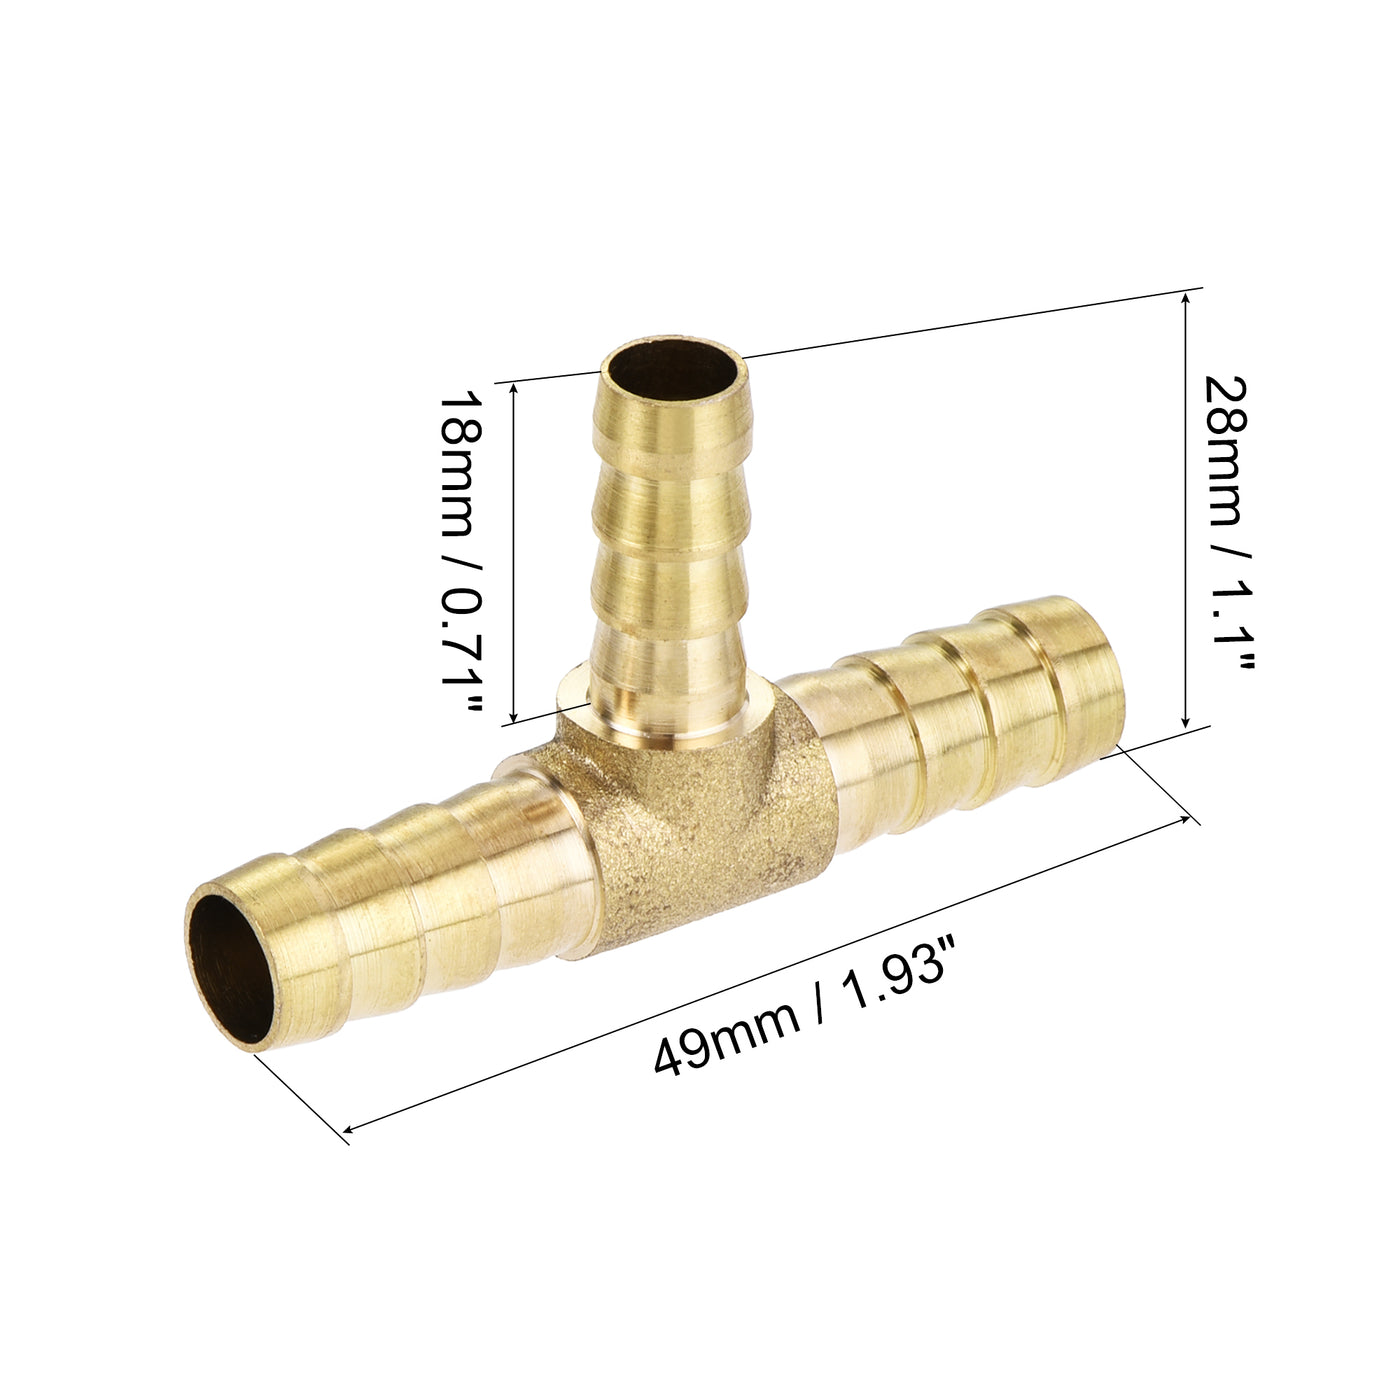 Uxcell Uxcell Reducing Barb Hose Fitting Tee T Shape Pipe Connector Brass 3/8" x 3/8" x 5/16"